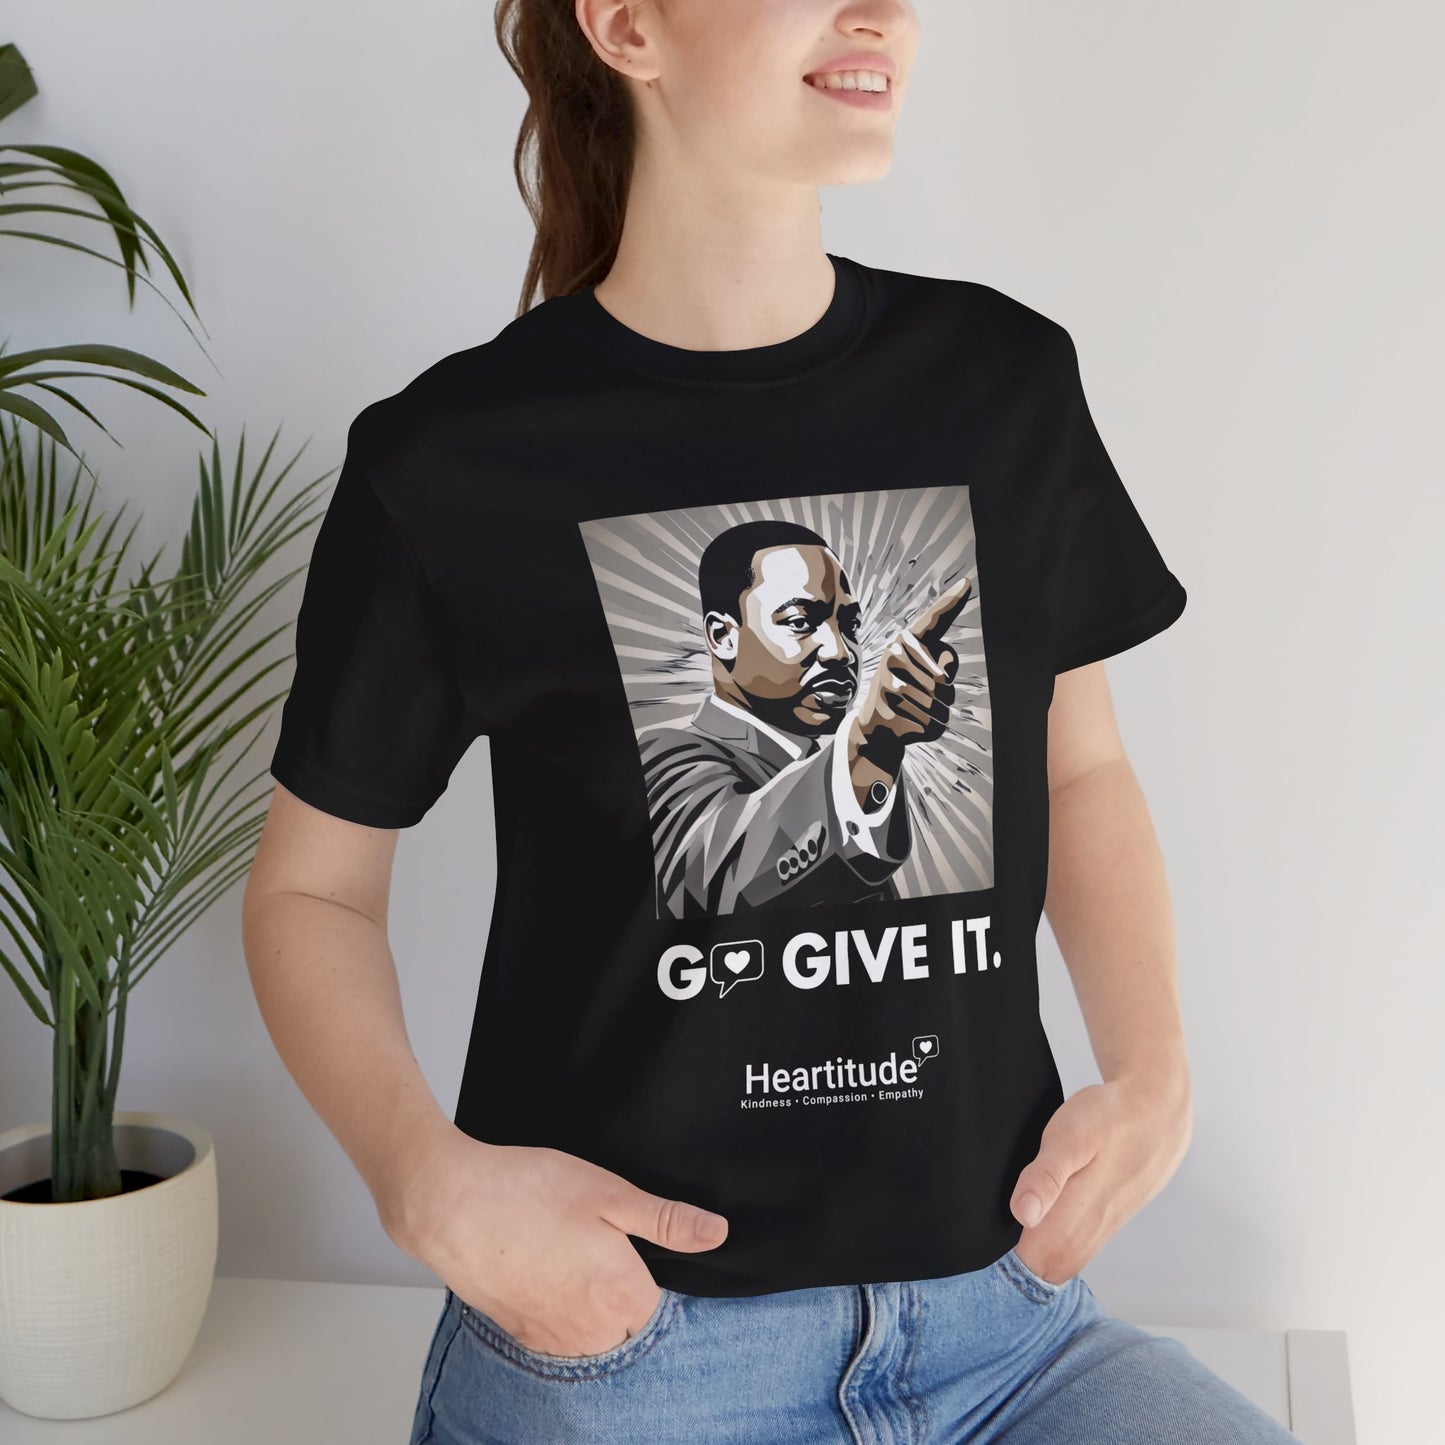 Go Give It with Dr. King Tee (50% to charity)